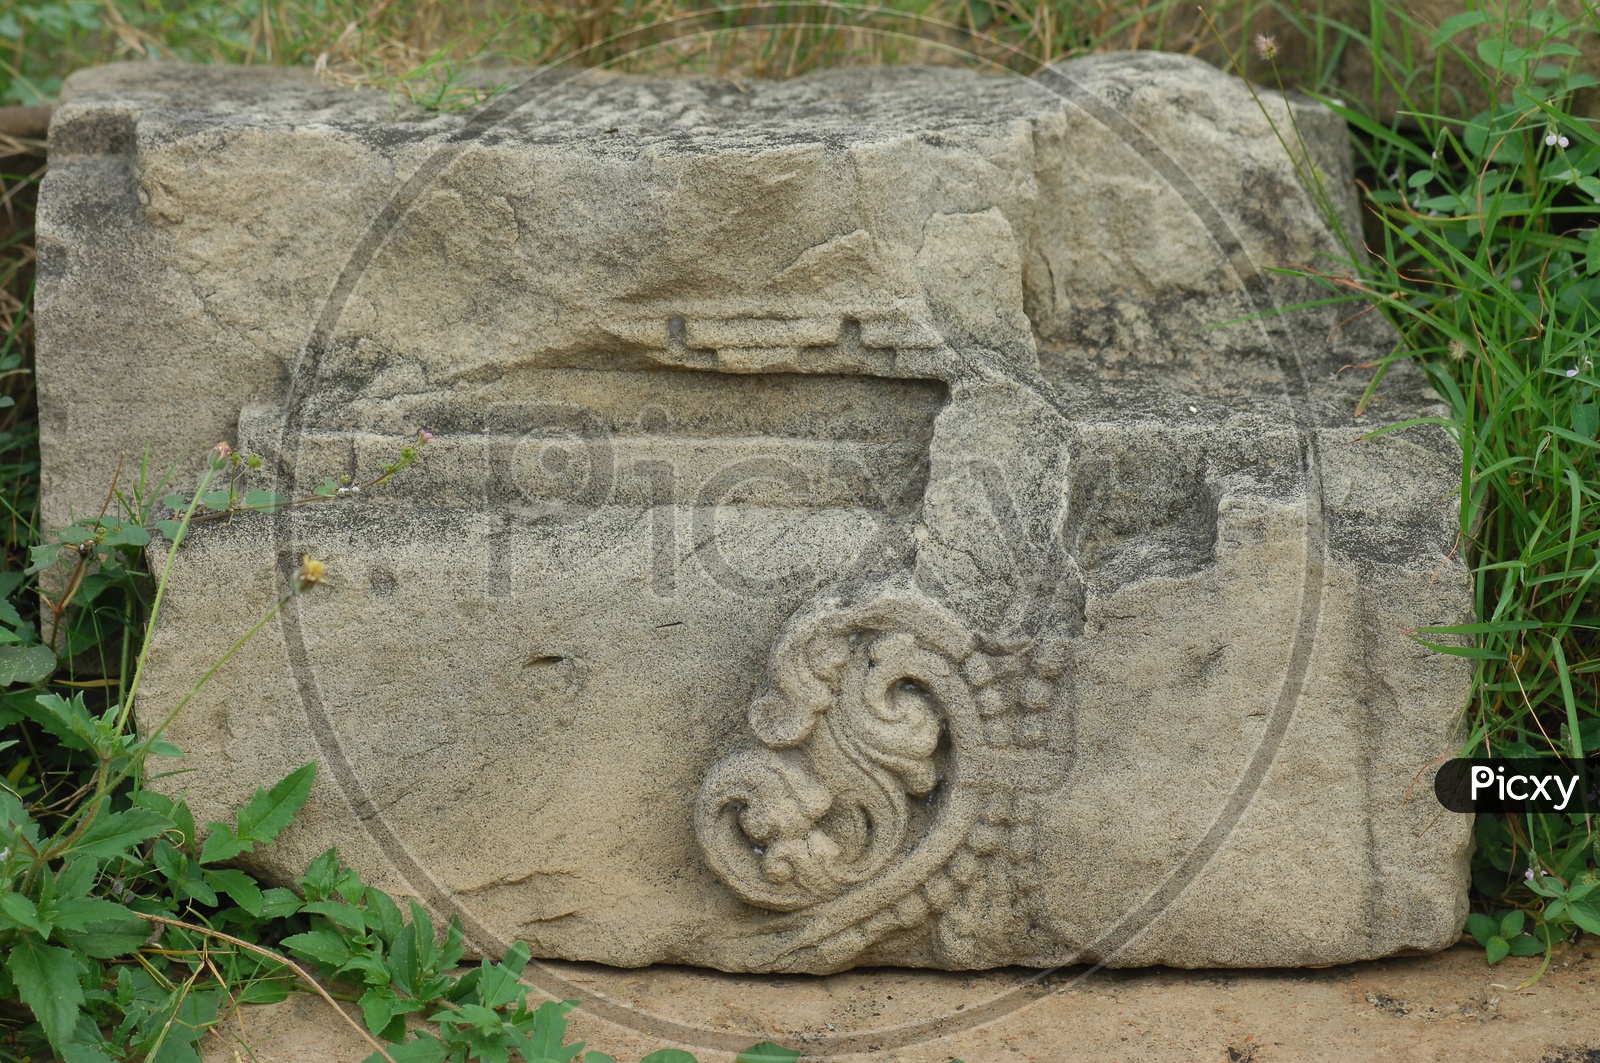 Stone carvings